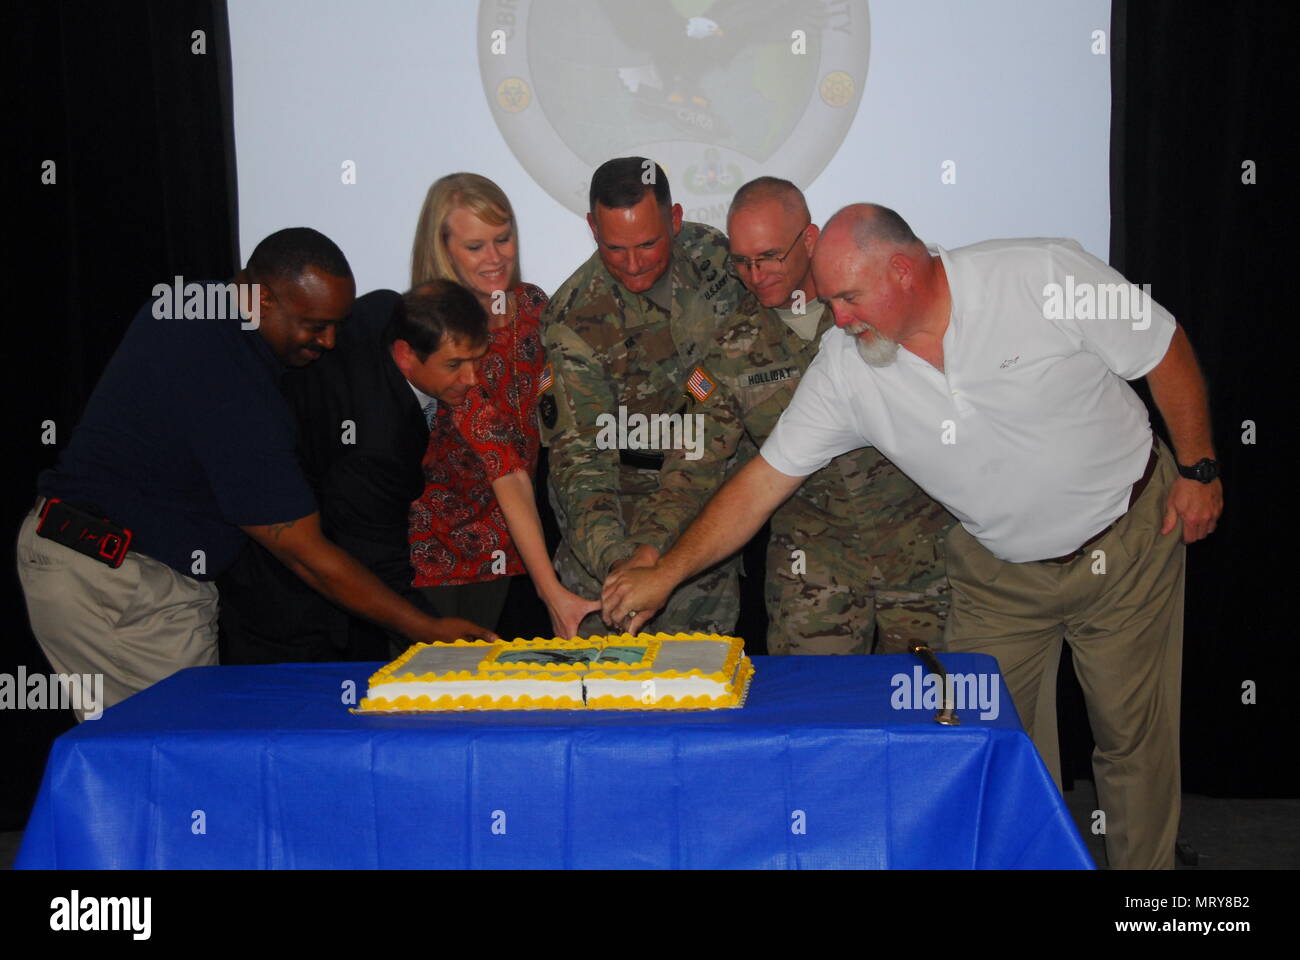 Brig. Gen. William E. King IV (center), commanding general of the 20th CBRNE Command from Aberdeen Proving Ground, Maryland, and Col. Thomas Holliday, Redstone Arsenal garrison commander, join special guests on July 10 to cut the cake that signifies the mission-ready status for the CARA-West team. This 37-member, highly specialized team completed a move this spring from Pinebluff Arsenal, Arkansas, to Redstone Arsenal next to Huntsville, Alabama. (20th CBRNE Command photo by Clem Gaines) Stock Photo